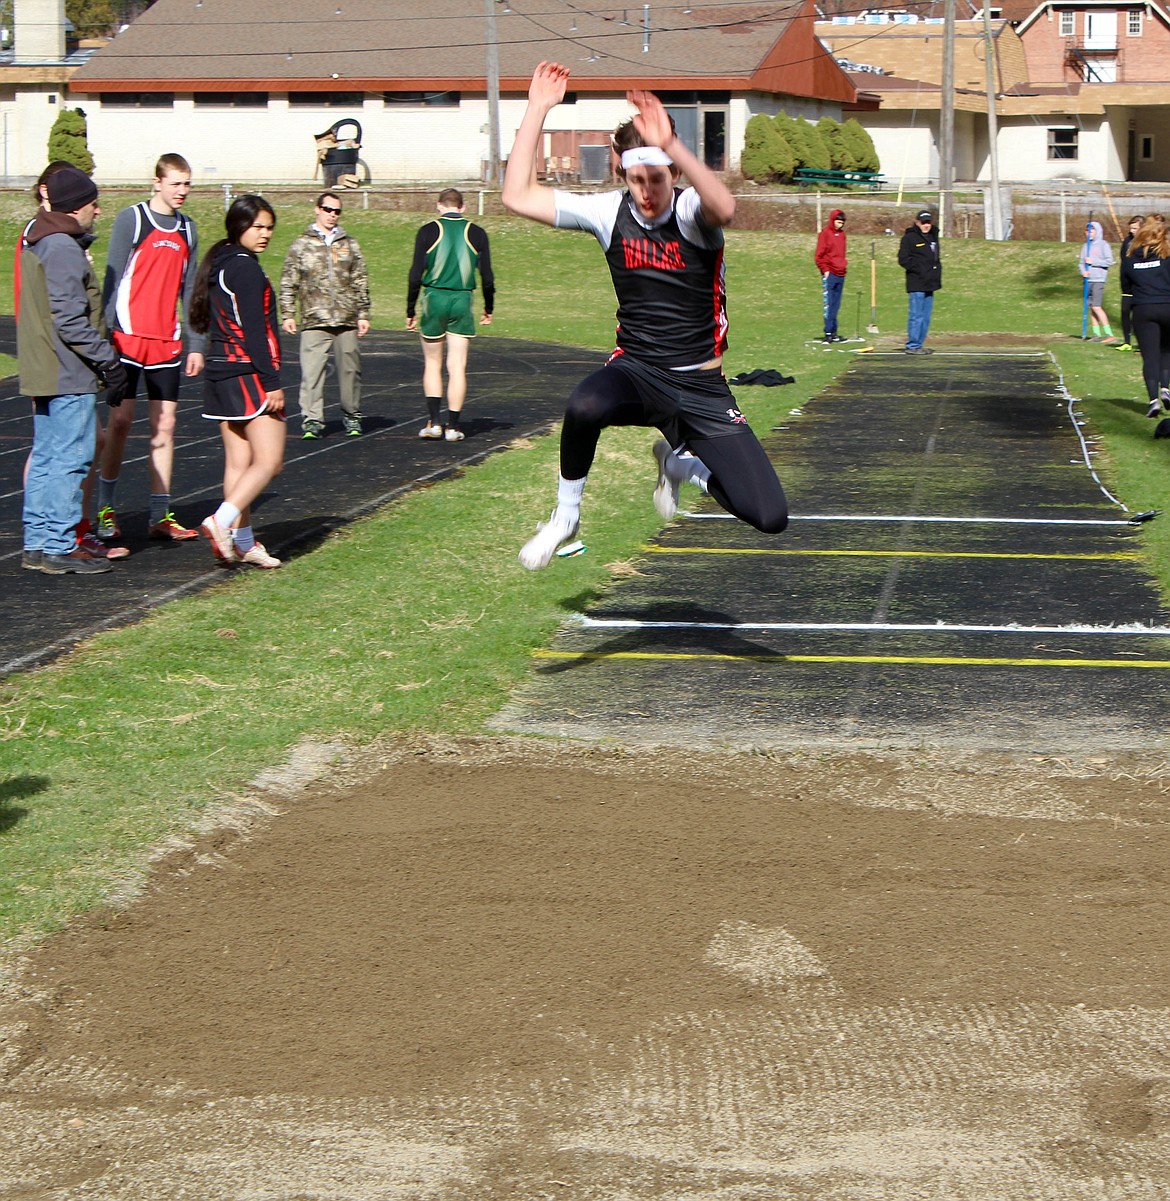 Photo by Chanse Watson 
Erik Brackebusch takes to the skies during his long jump at Sather Field.